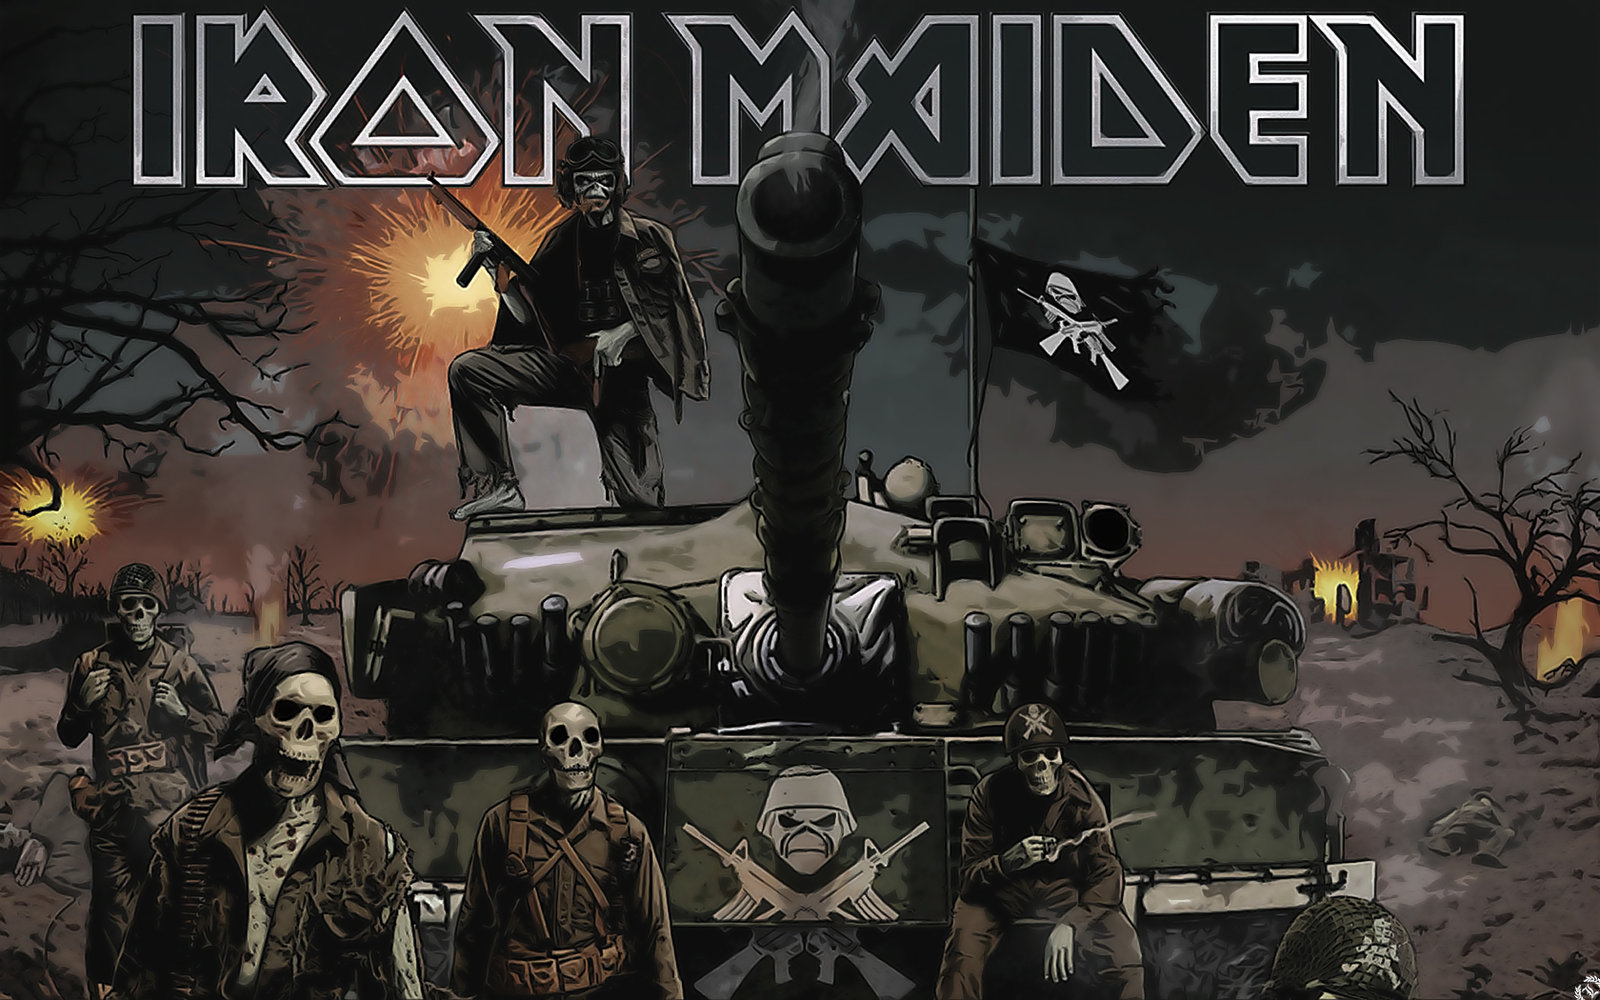 Iron Maiden Wallpaper by Lyhil on